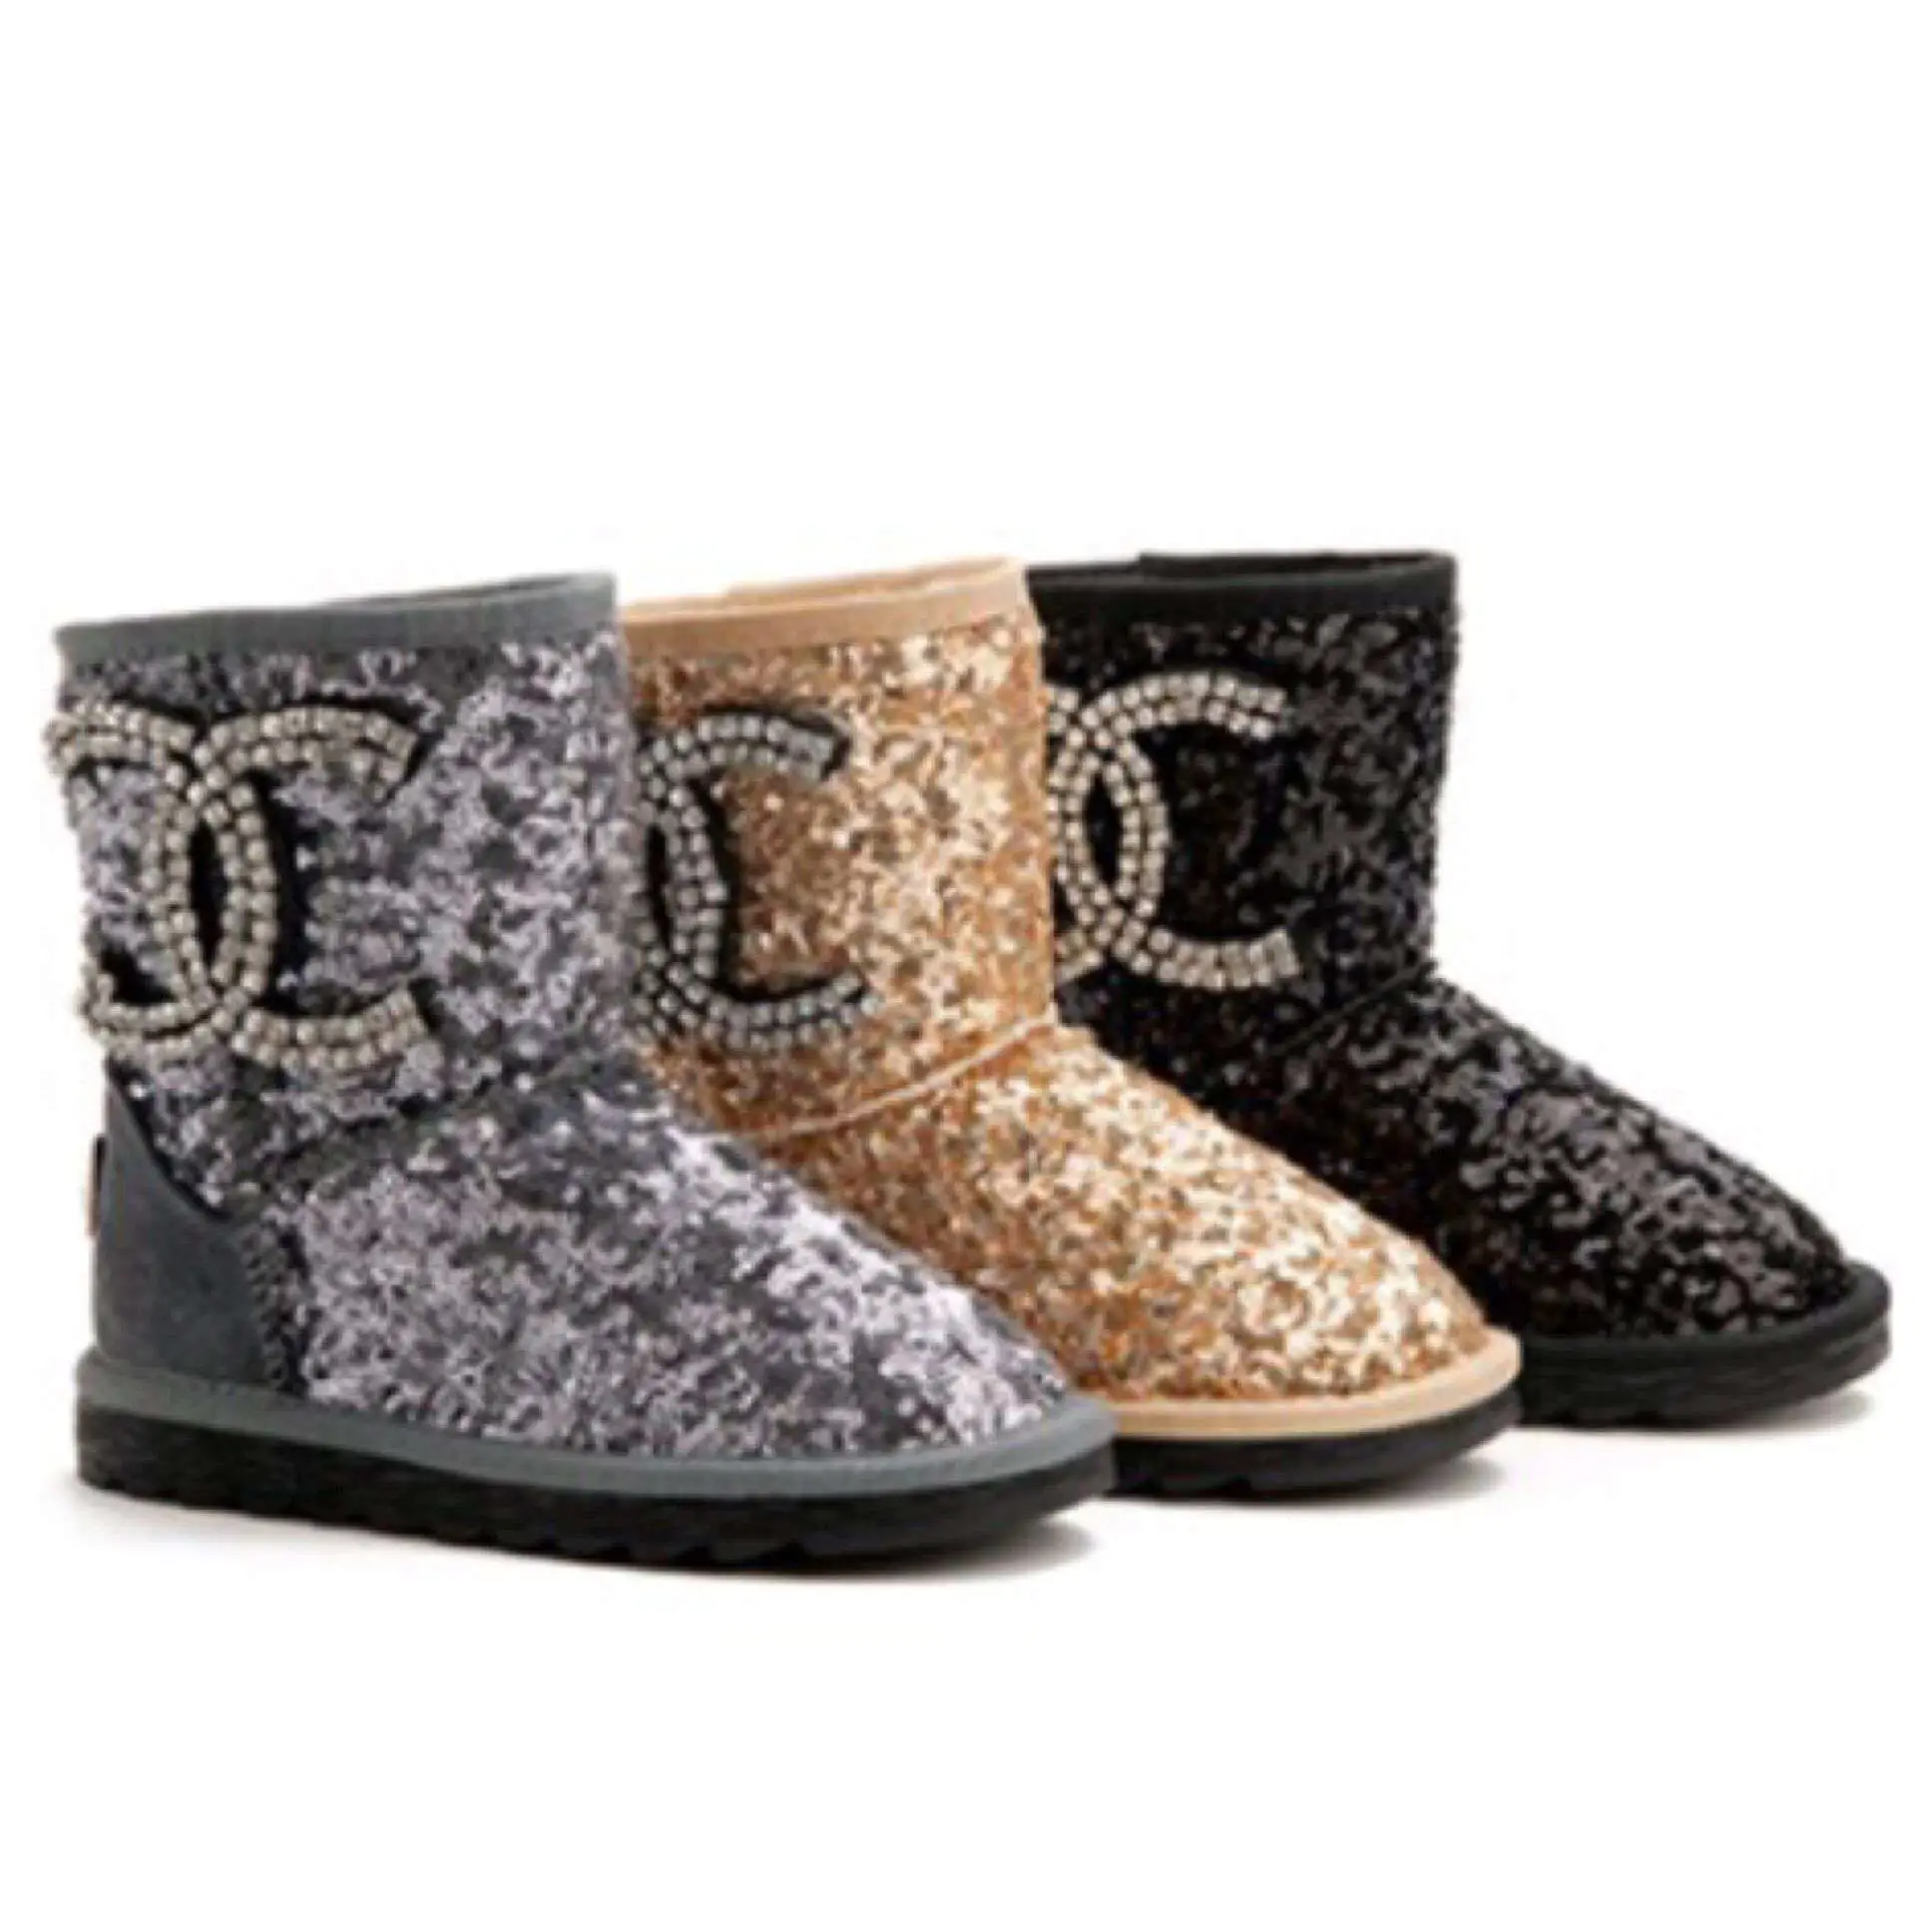 chanel Inspired Ugg style boots